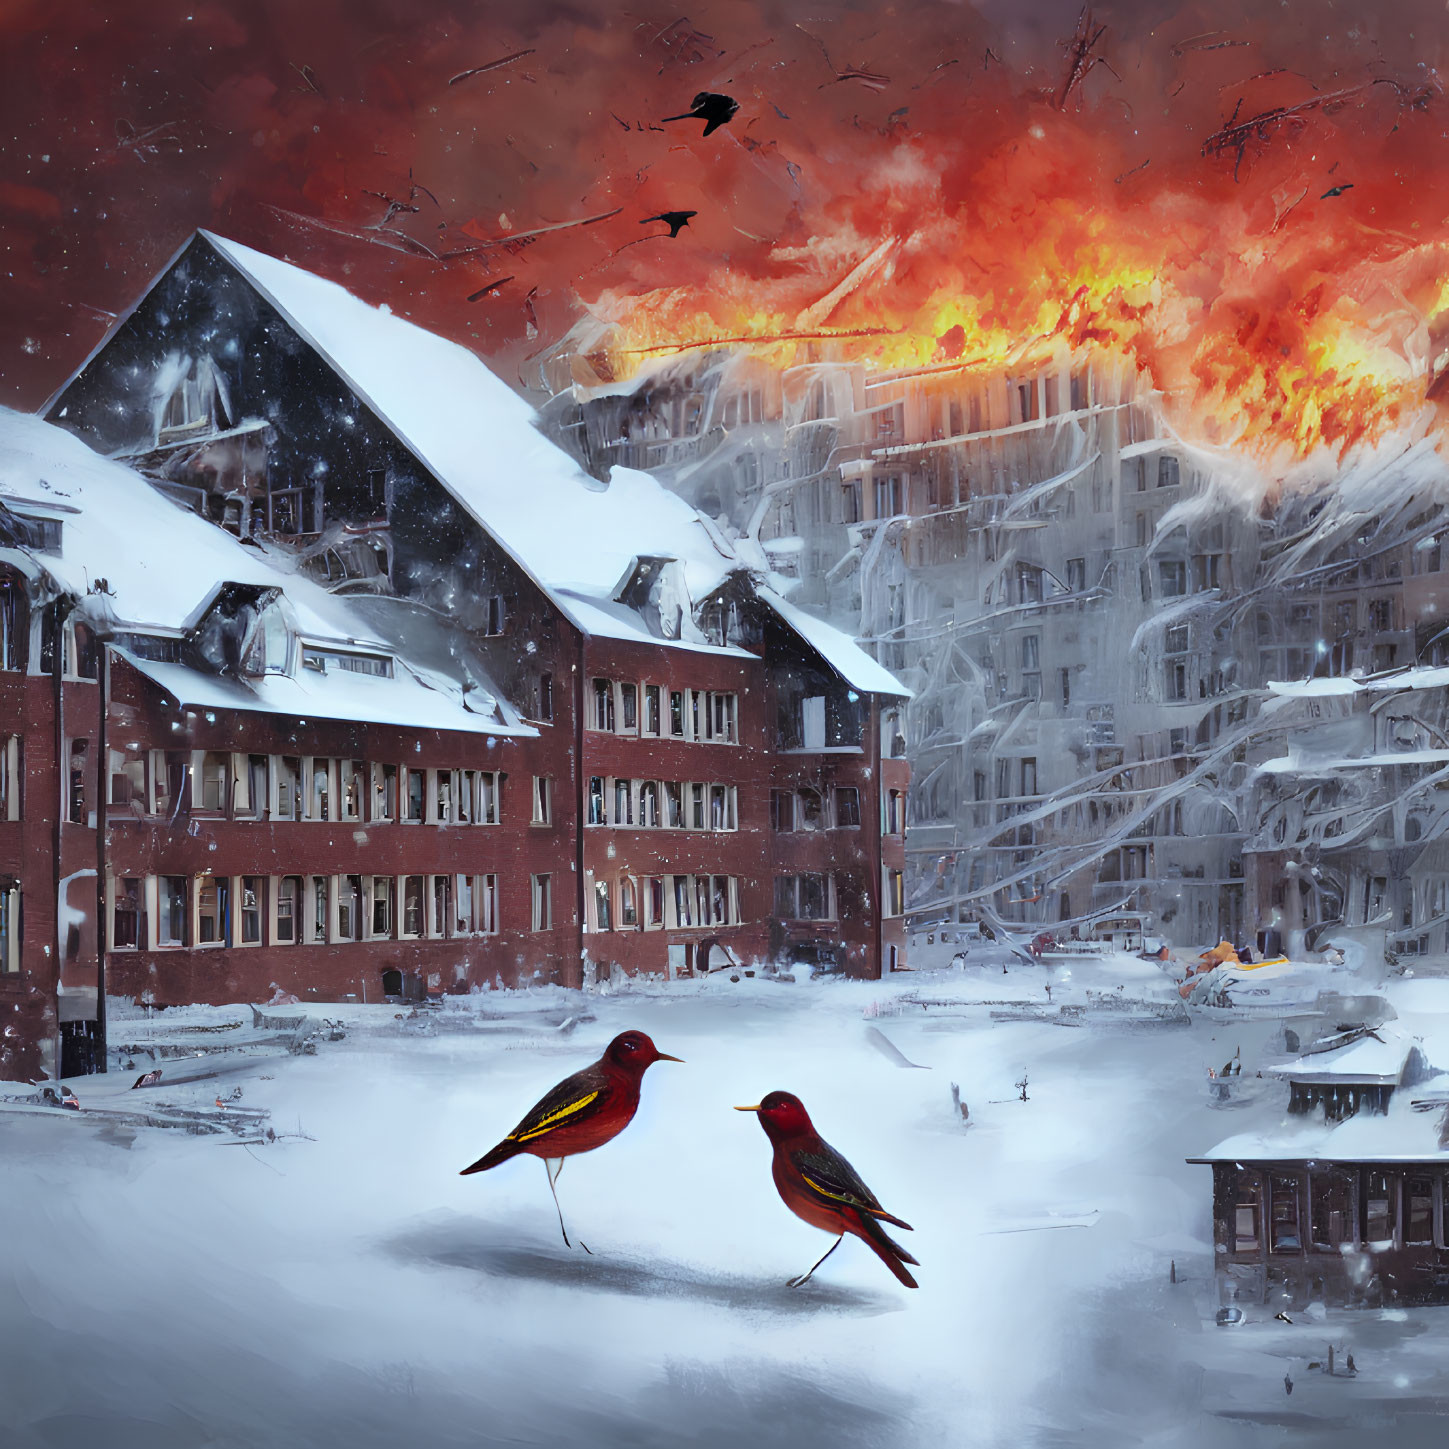 Snowy scene with birds, burning building, and tumultuous sky.